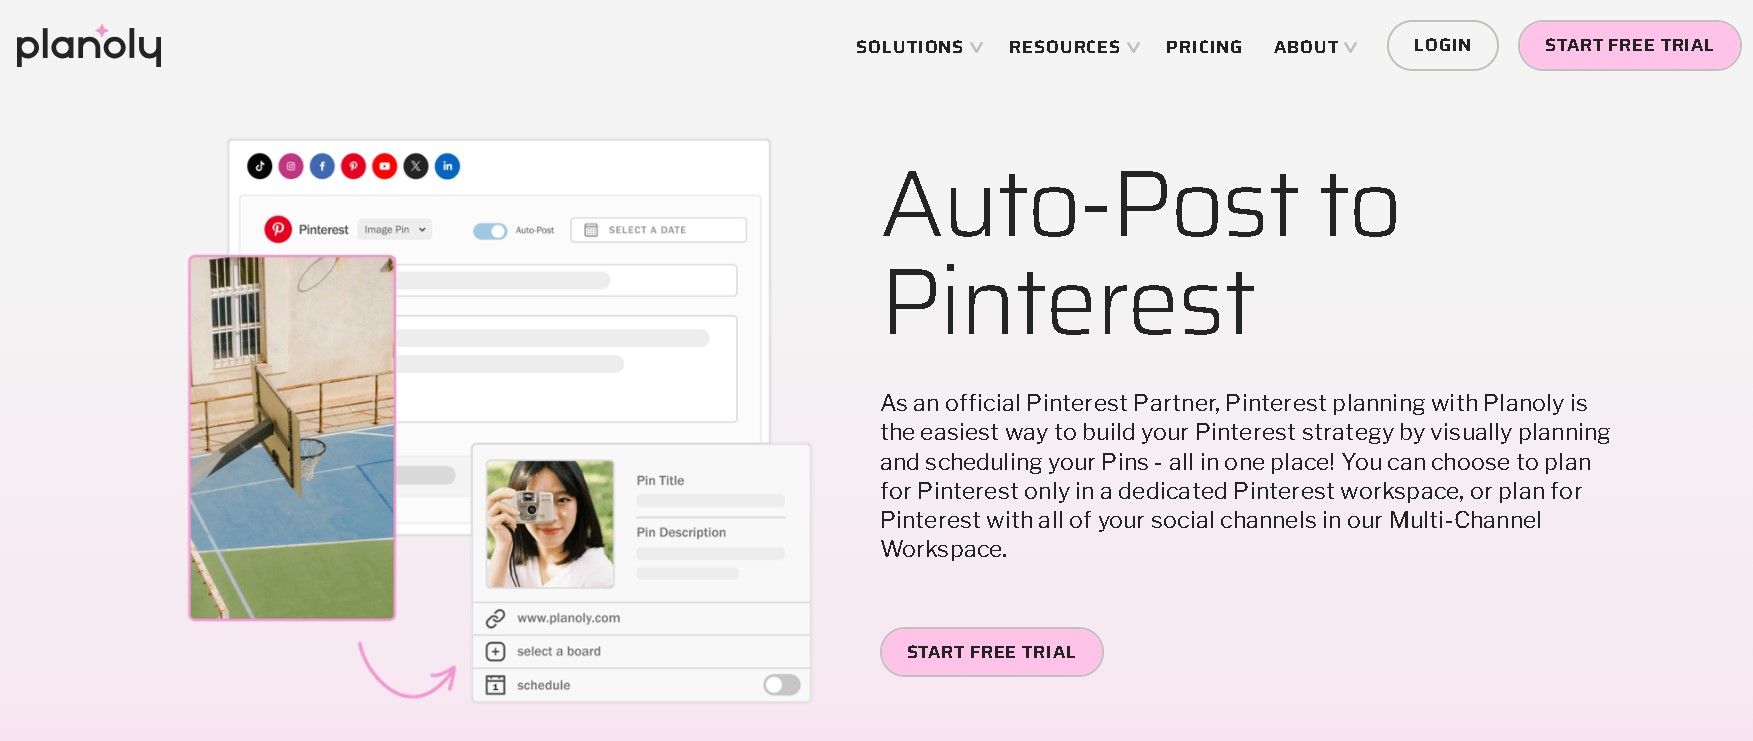 Planoly is a Pinterest automation tool for creators.